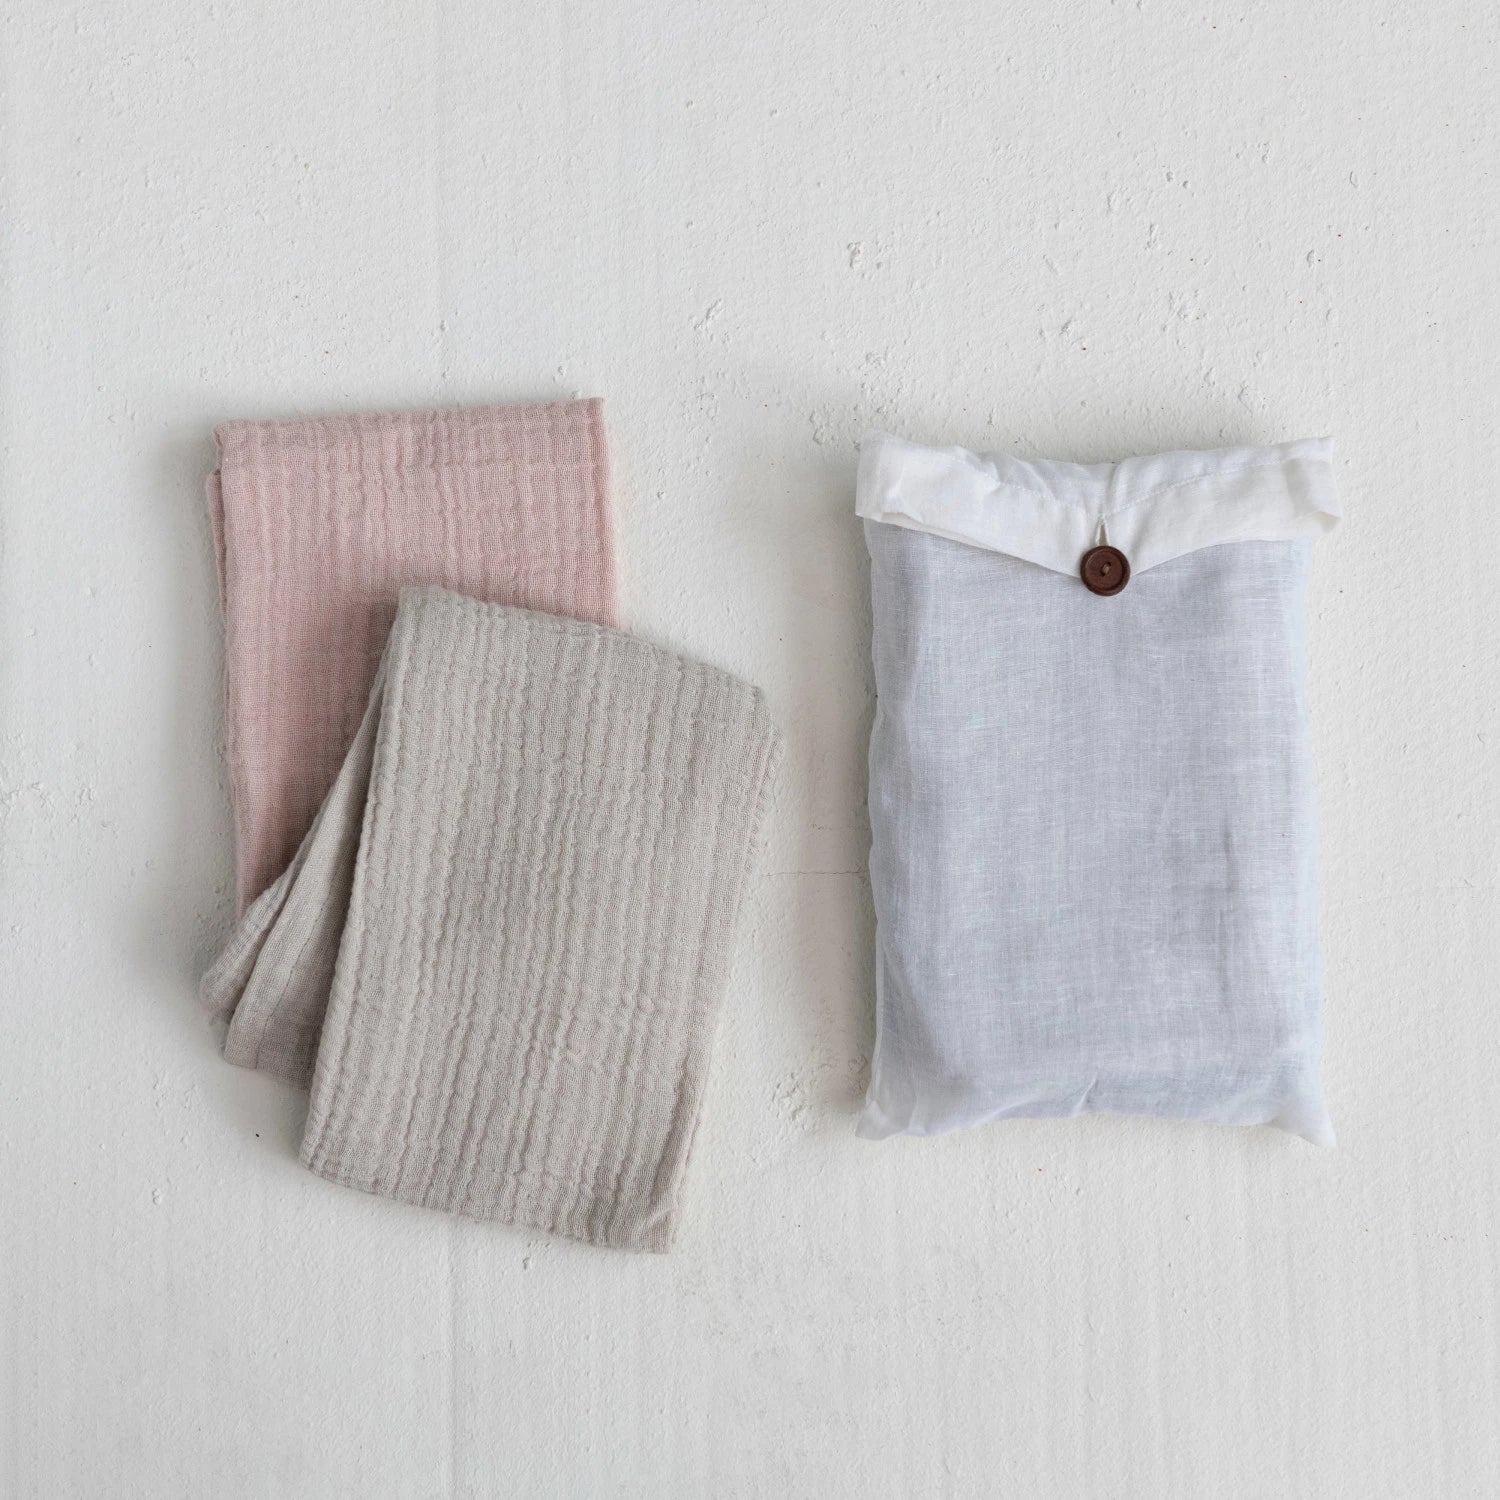 Cotton Double Cloth Tea Towels - Set of 2 in Bag